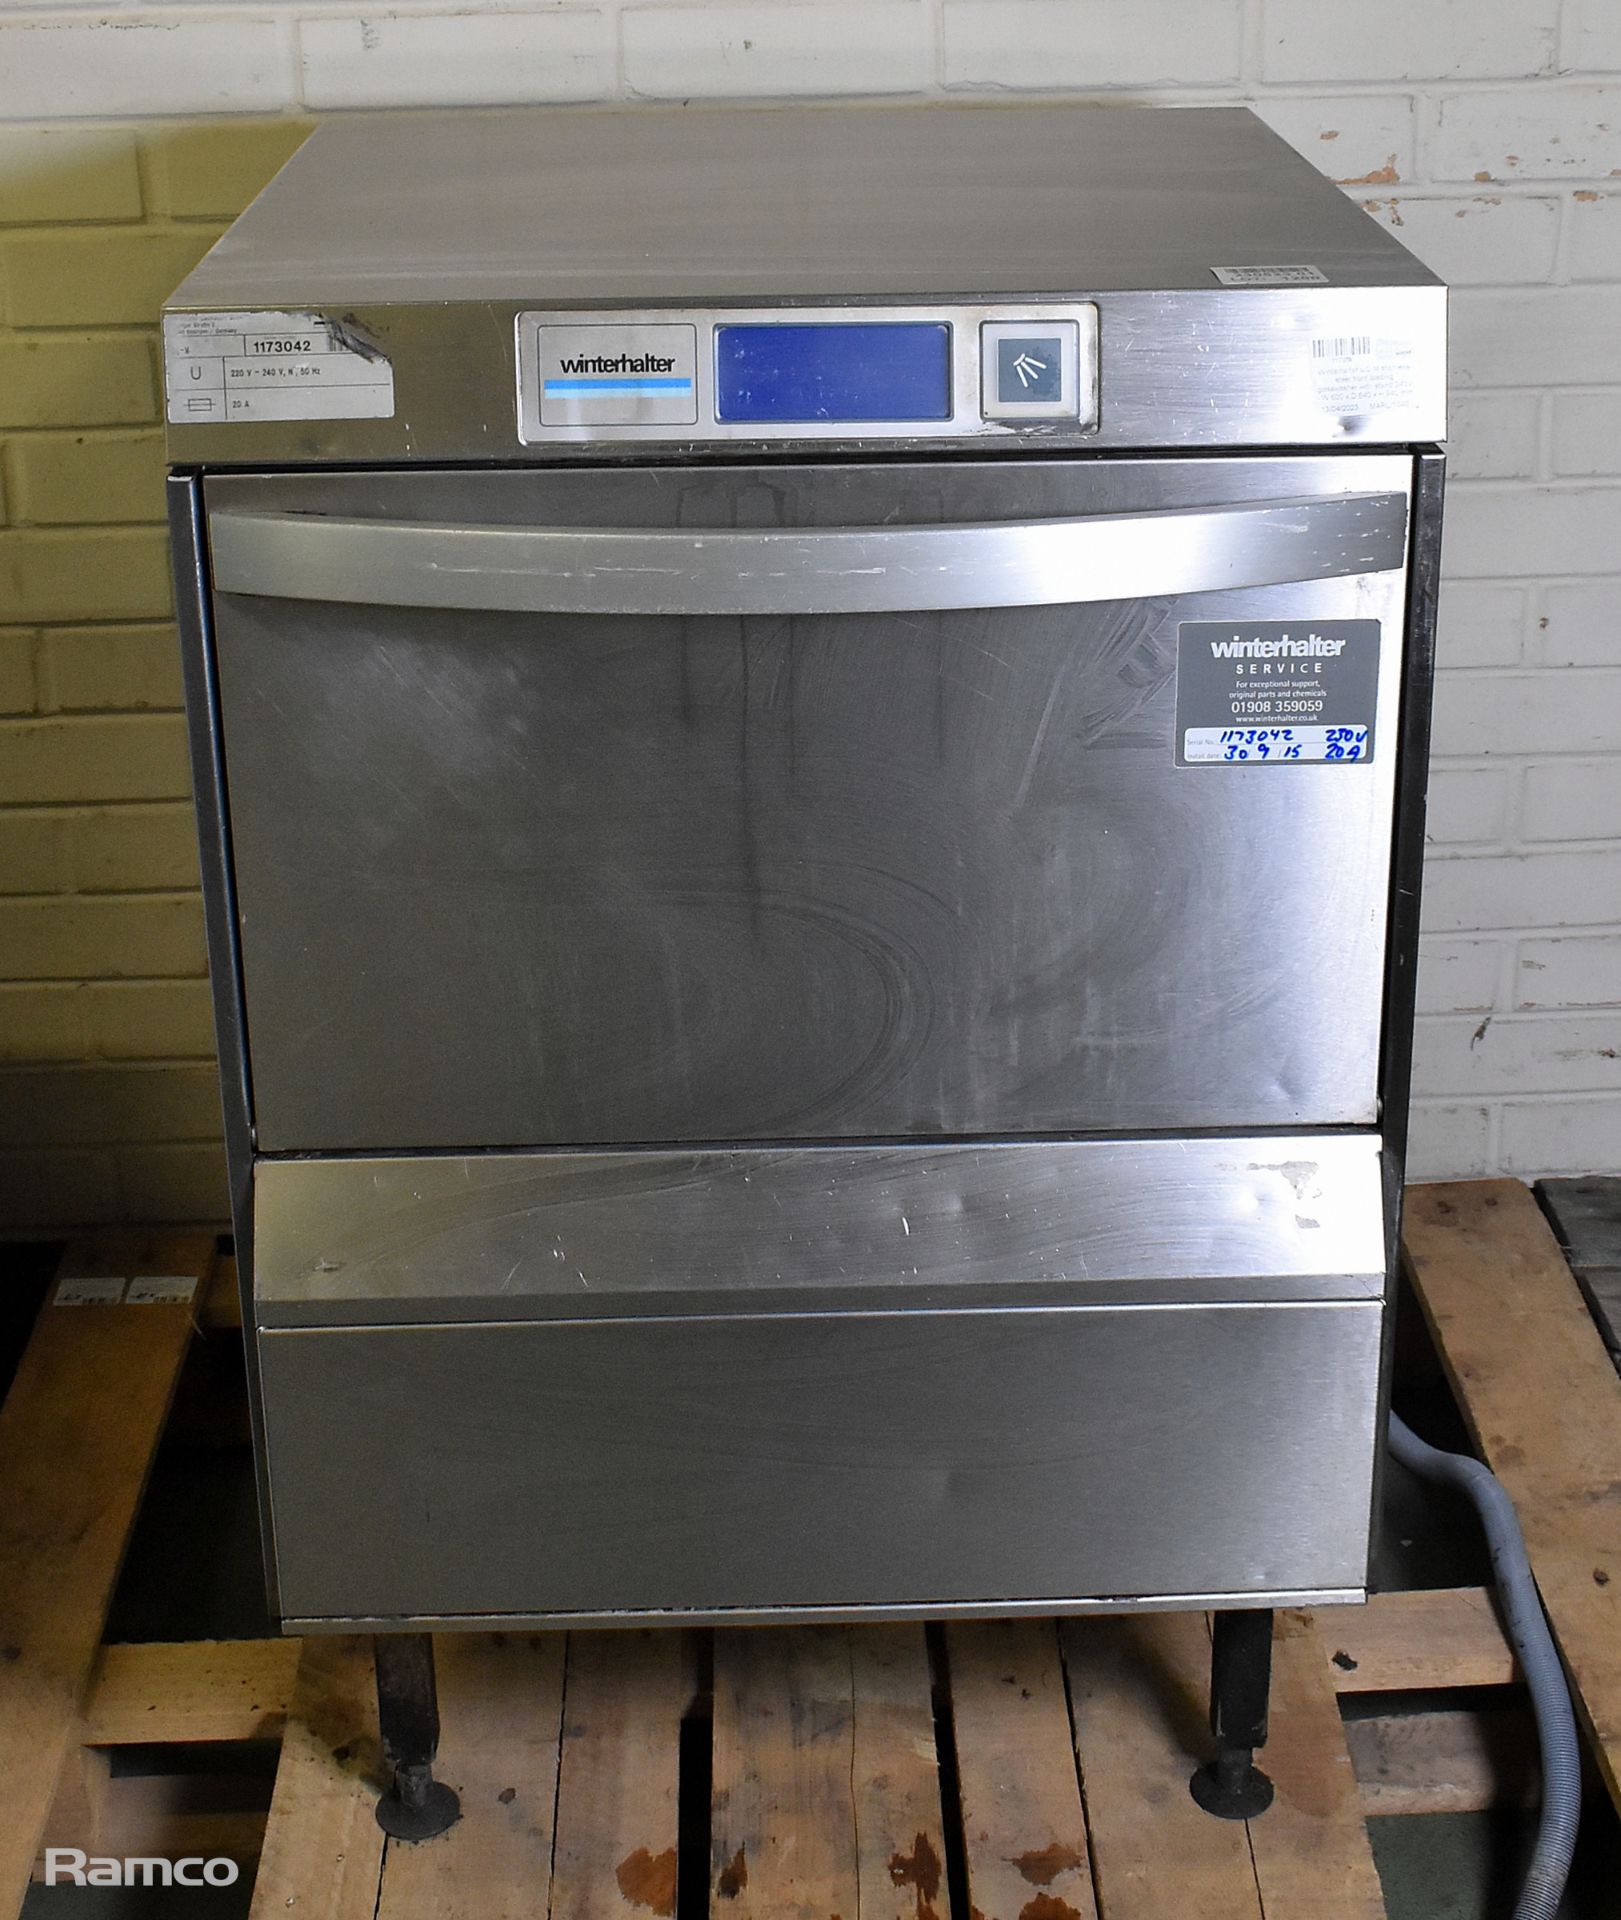 Winterhalter UC-M stainless steel front loading glasswasher with stand 240V - W 600 x D 640 x H 940